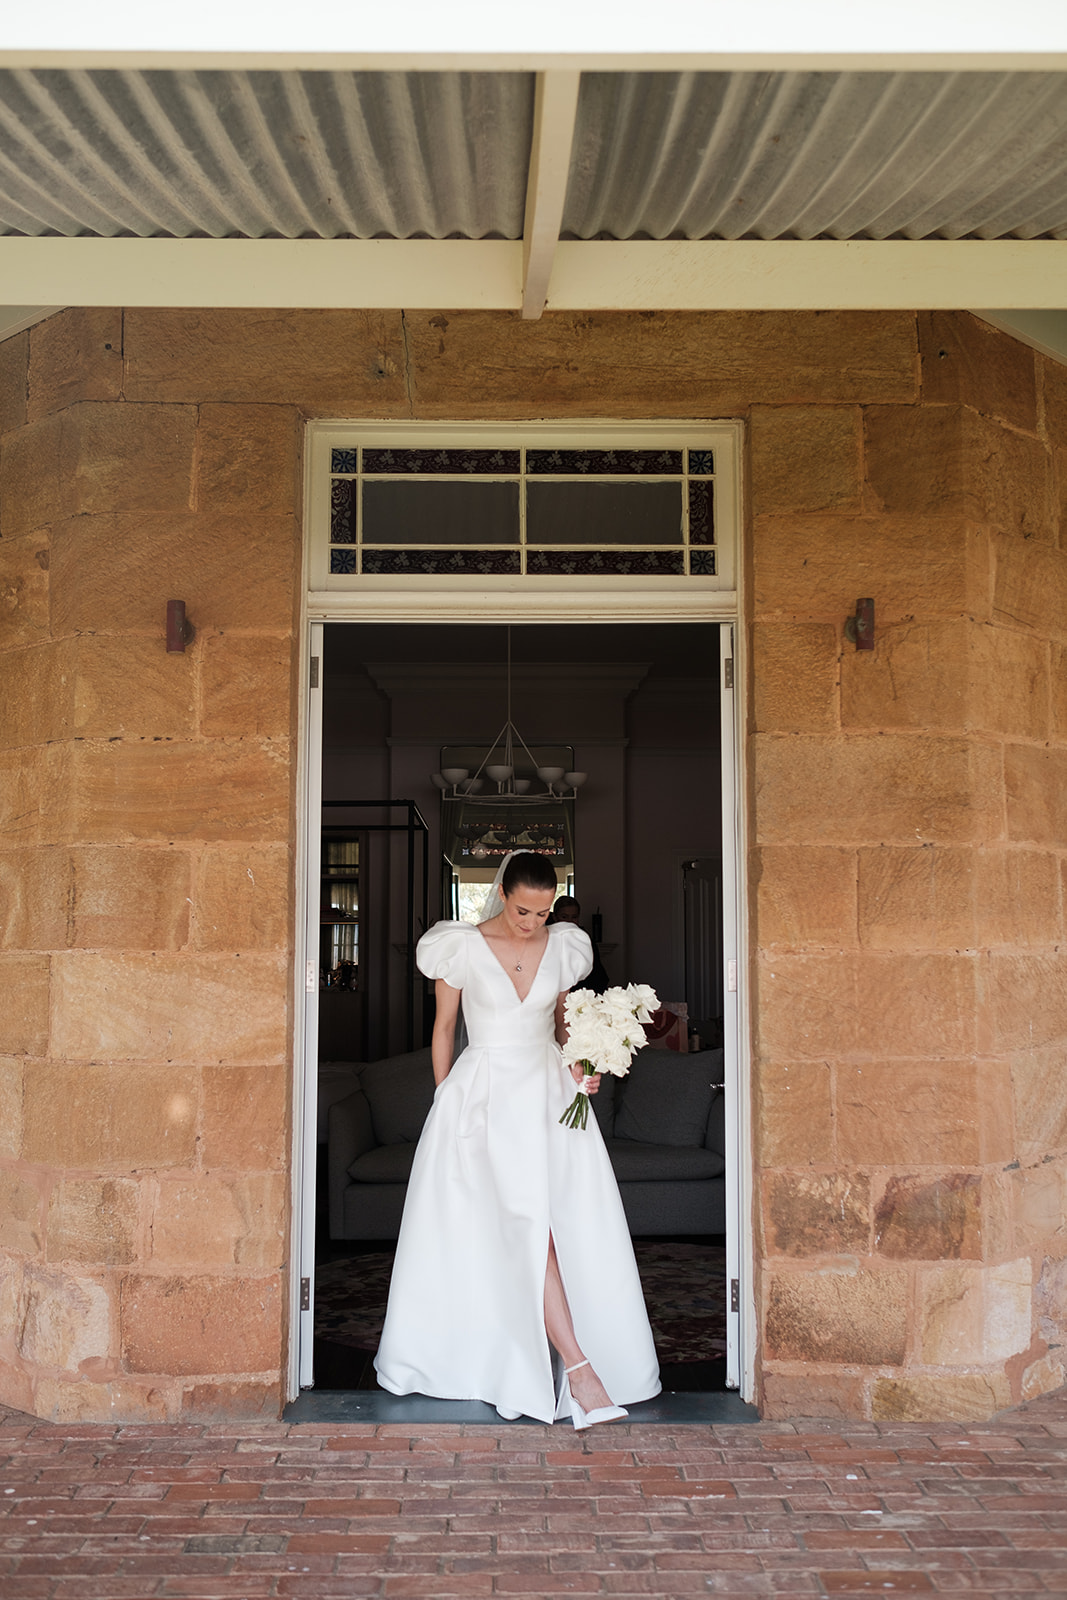 Bride Katie standing in a doorway on her wedding day at Kingsford Homestead in the Barossa Valley, South Australia